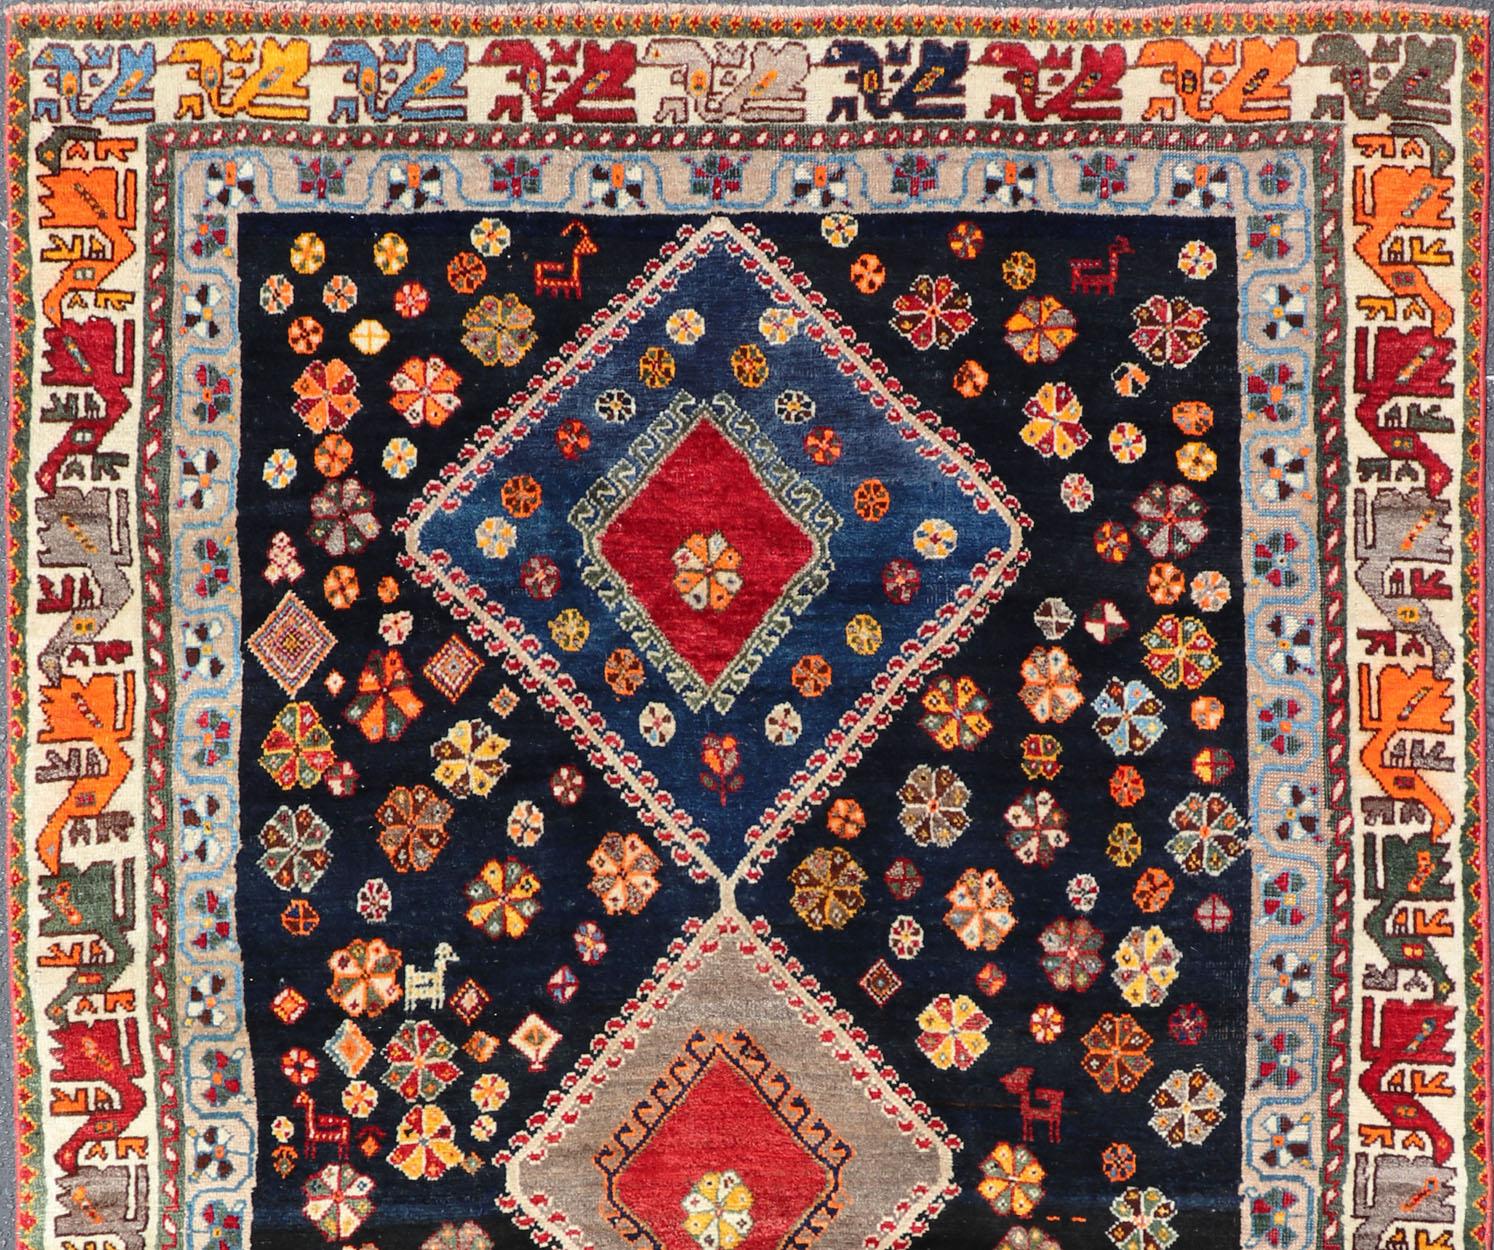 This vintage Persian Shiraz features a rich navy blue background under the centered red medallions, edged with green, gold, taupe, maroon, pinks and reds. Paired with earthy tones, such as greens, creams, oranges, and reds, in an intricate tribal